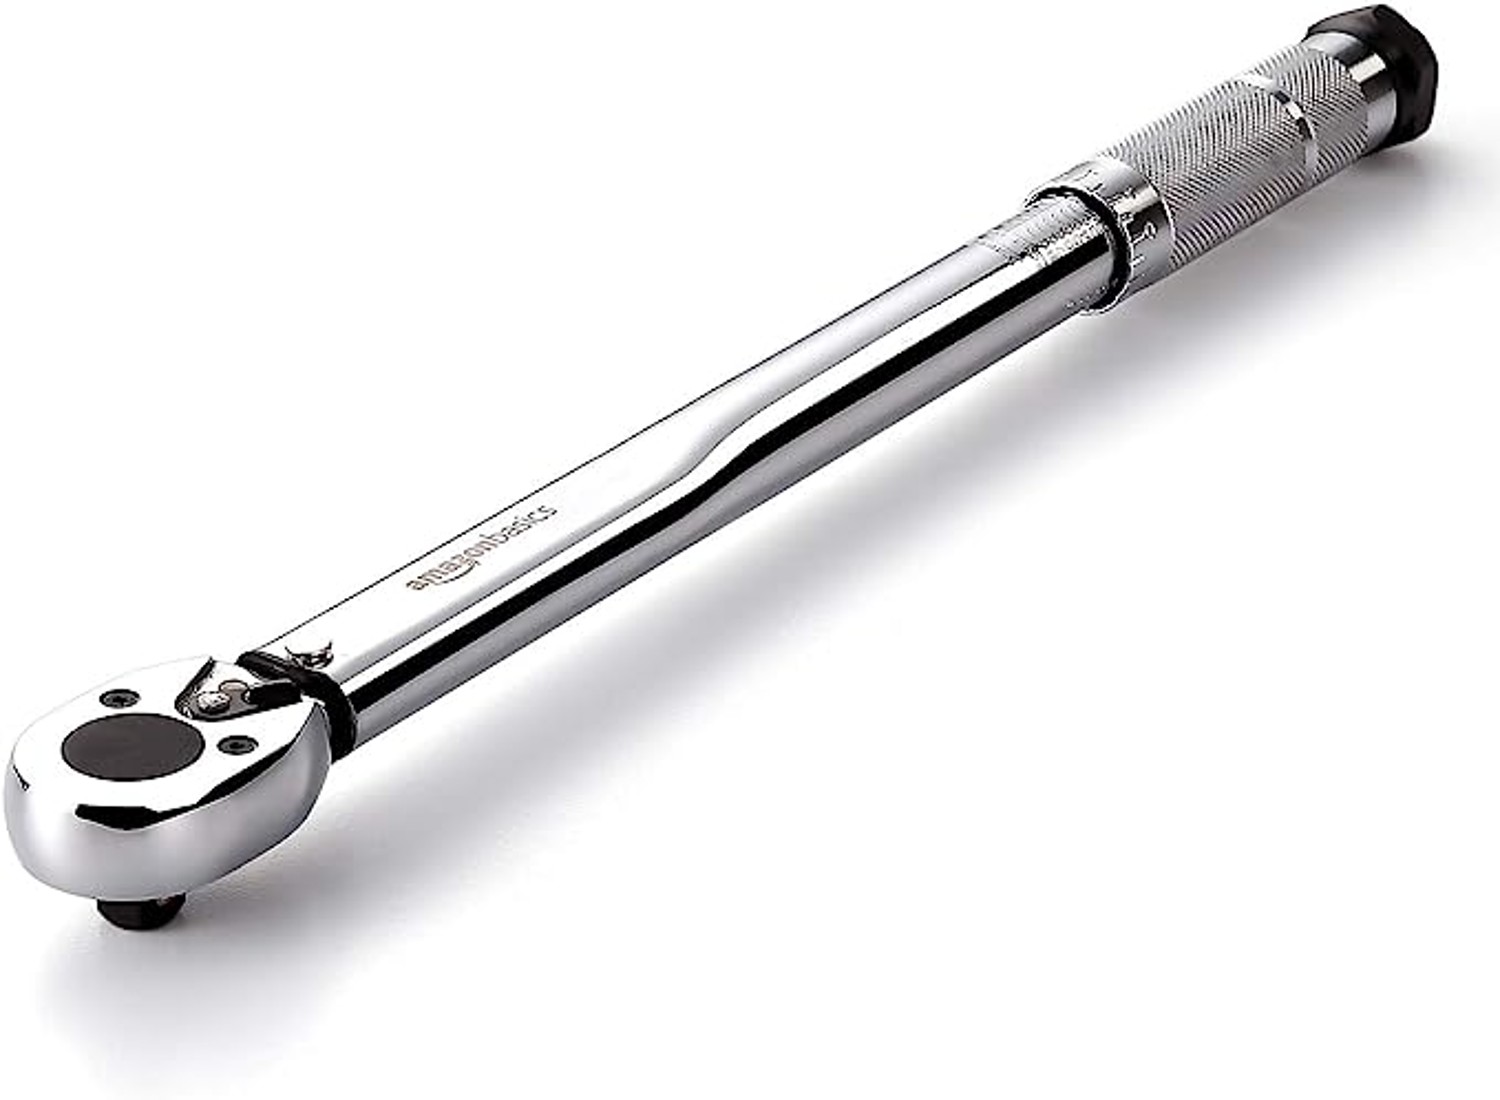 A silver torque wrench with a grip handle